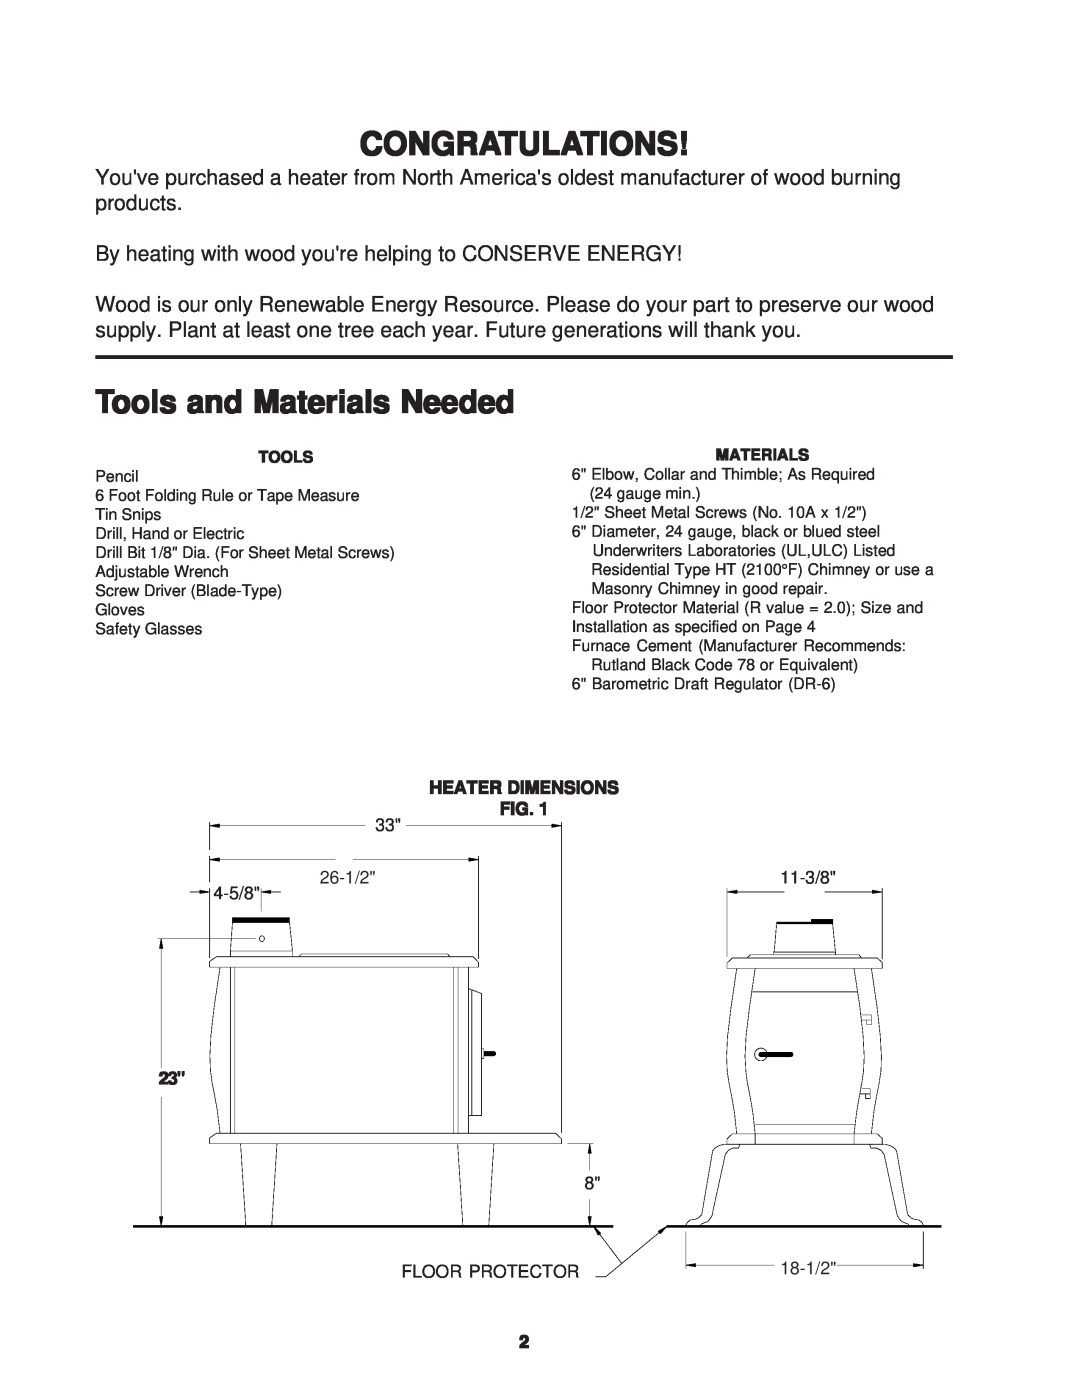 United States Stove C226 owner manual Congratulations, Tools and Materials Needed, Heater Dimensions 